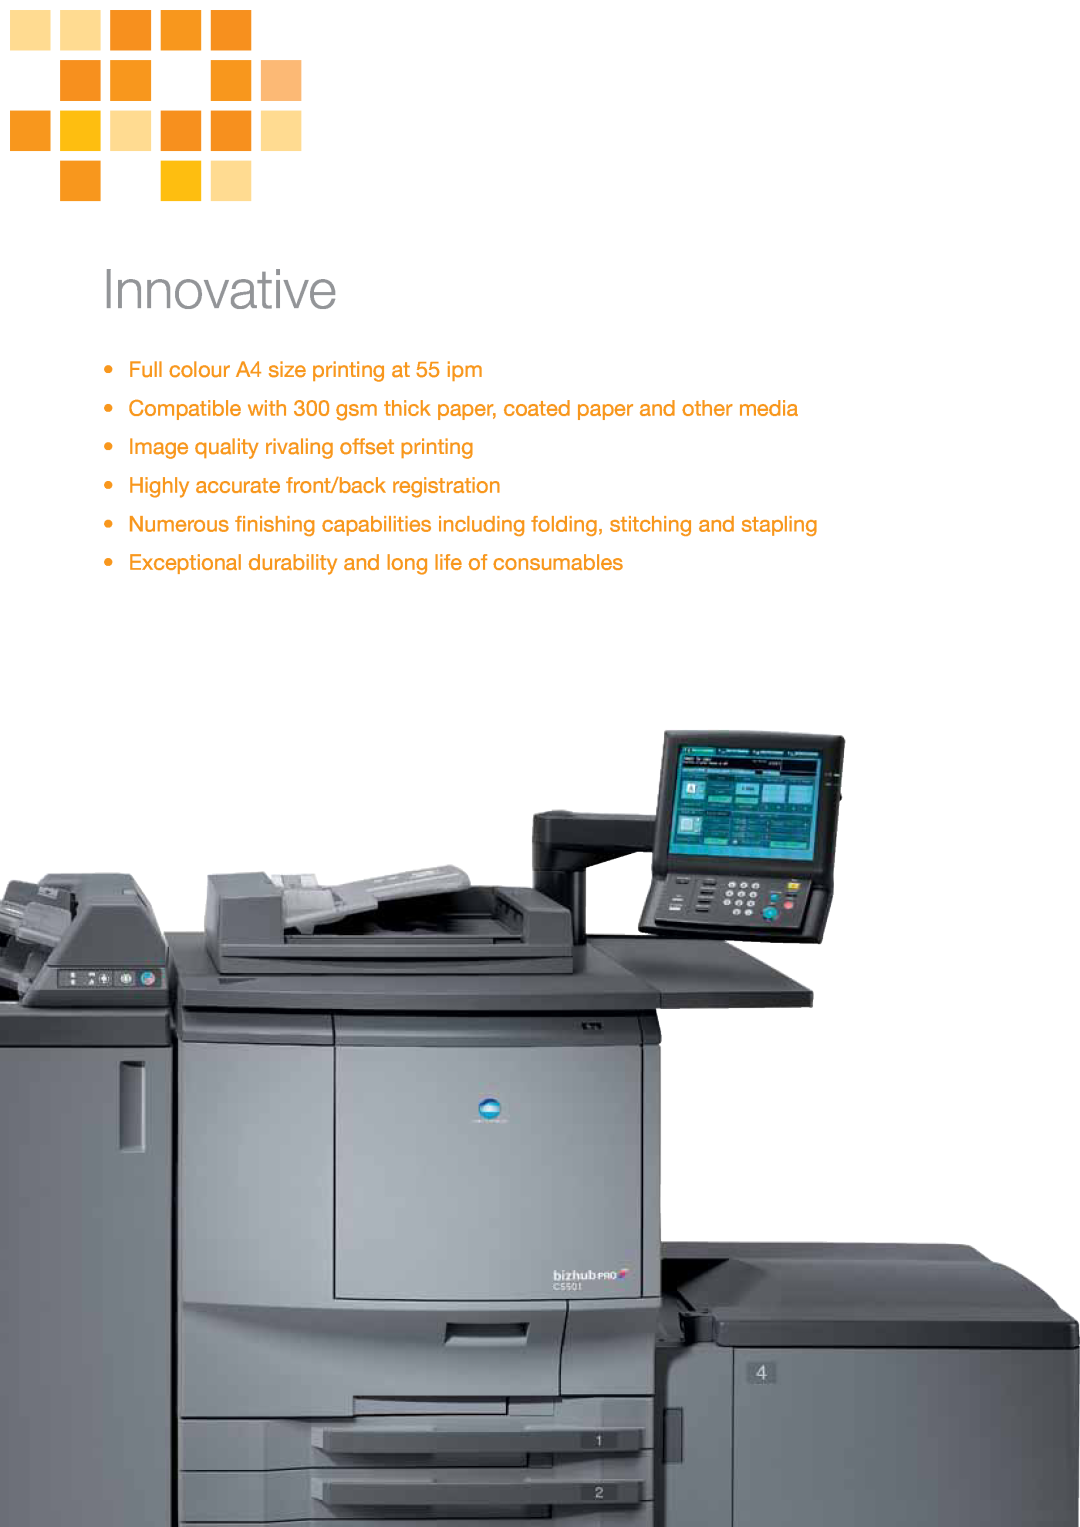 Konica Minolta C5501 manual Innovative, Full colour A4 size printing at 55 ipm, Image quality rivaling offset printing 